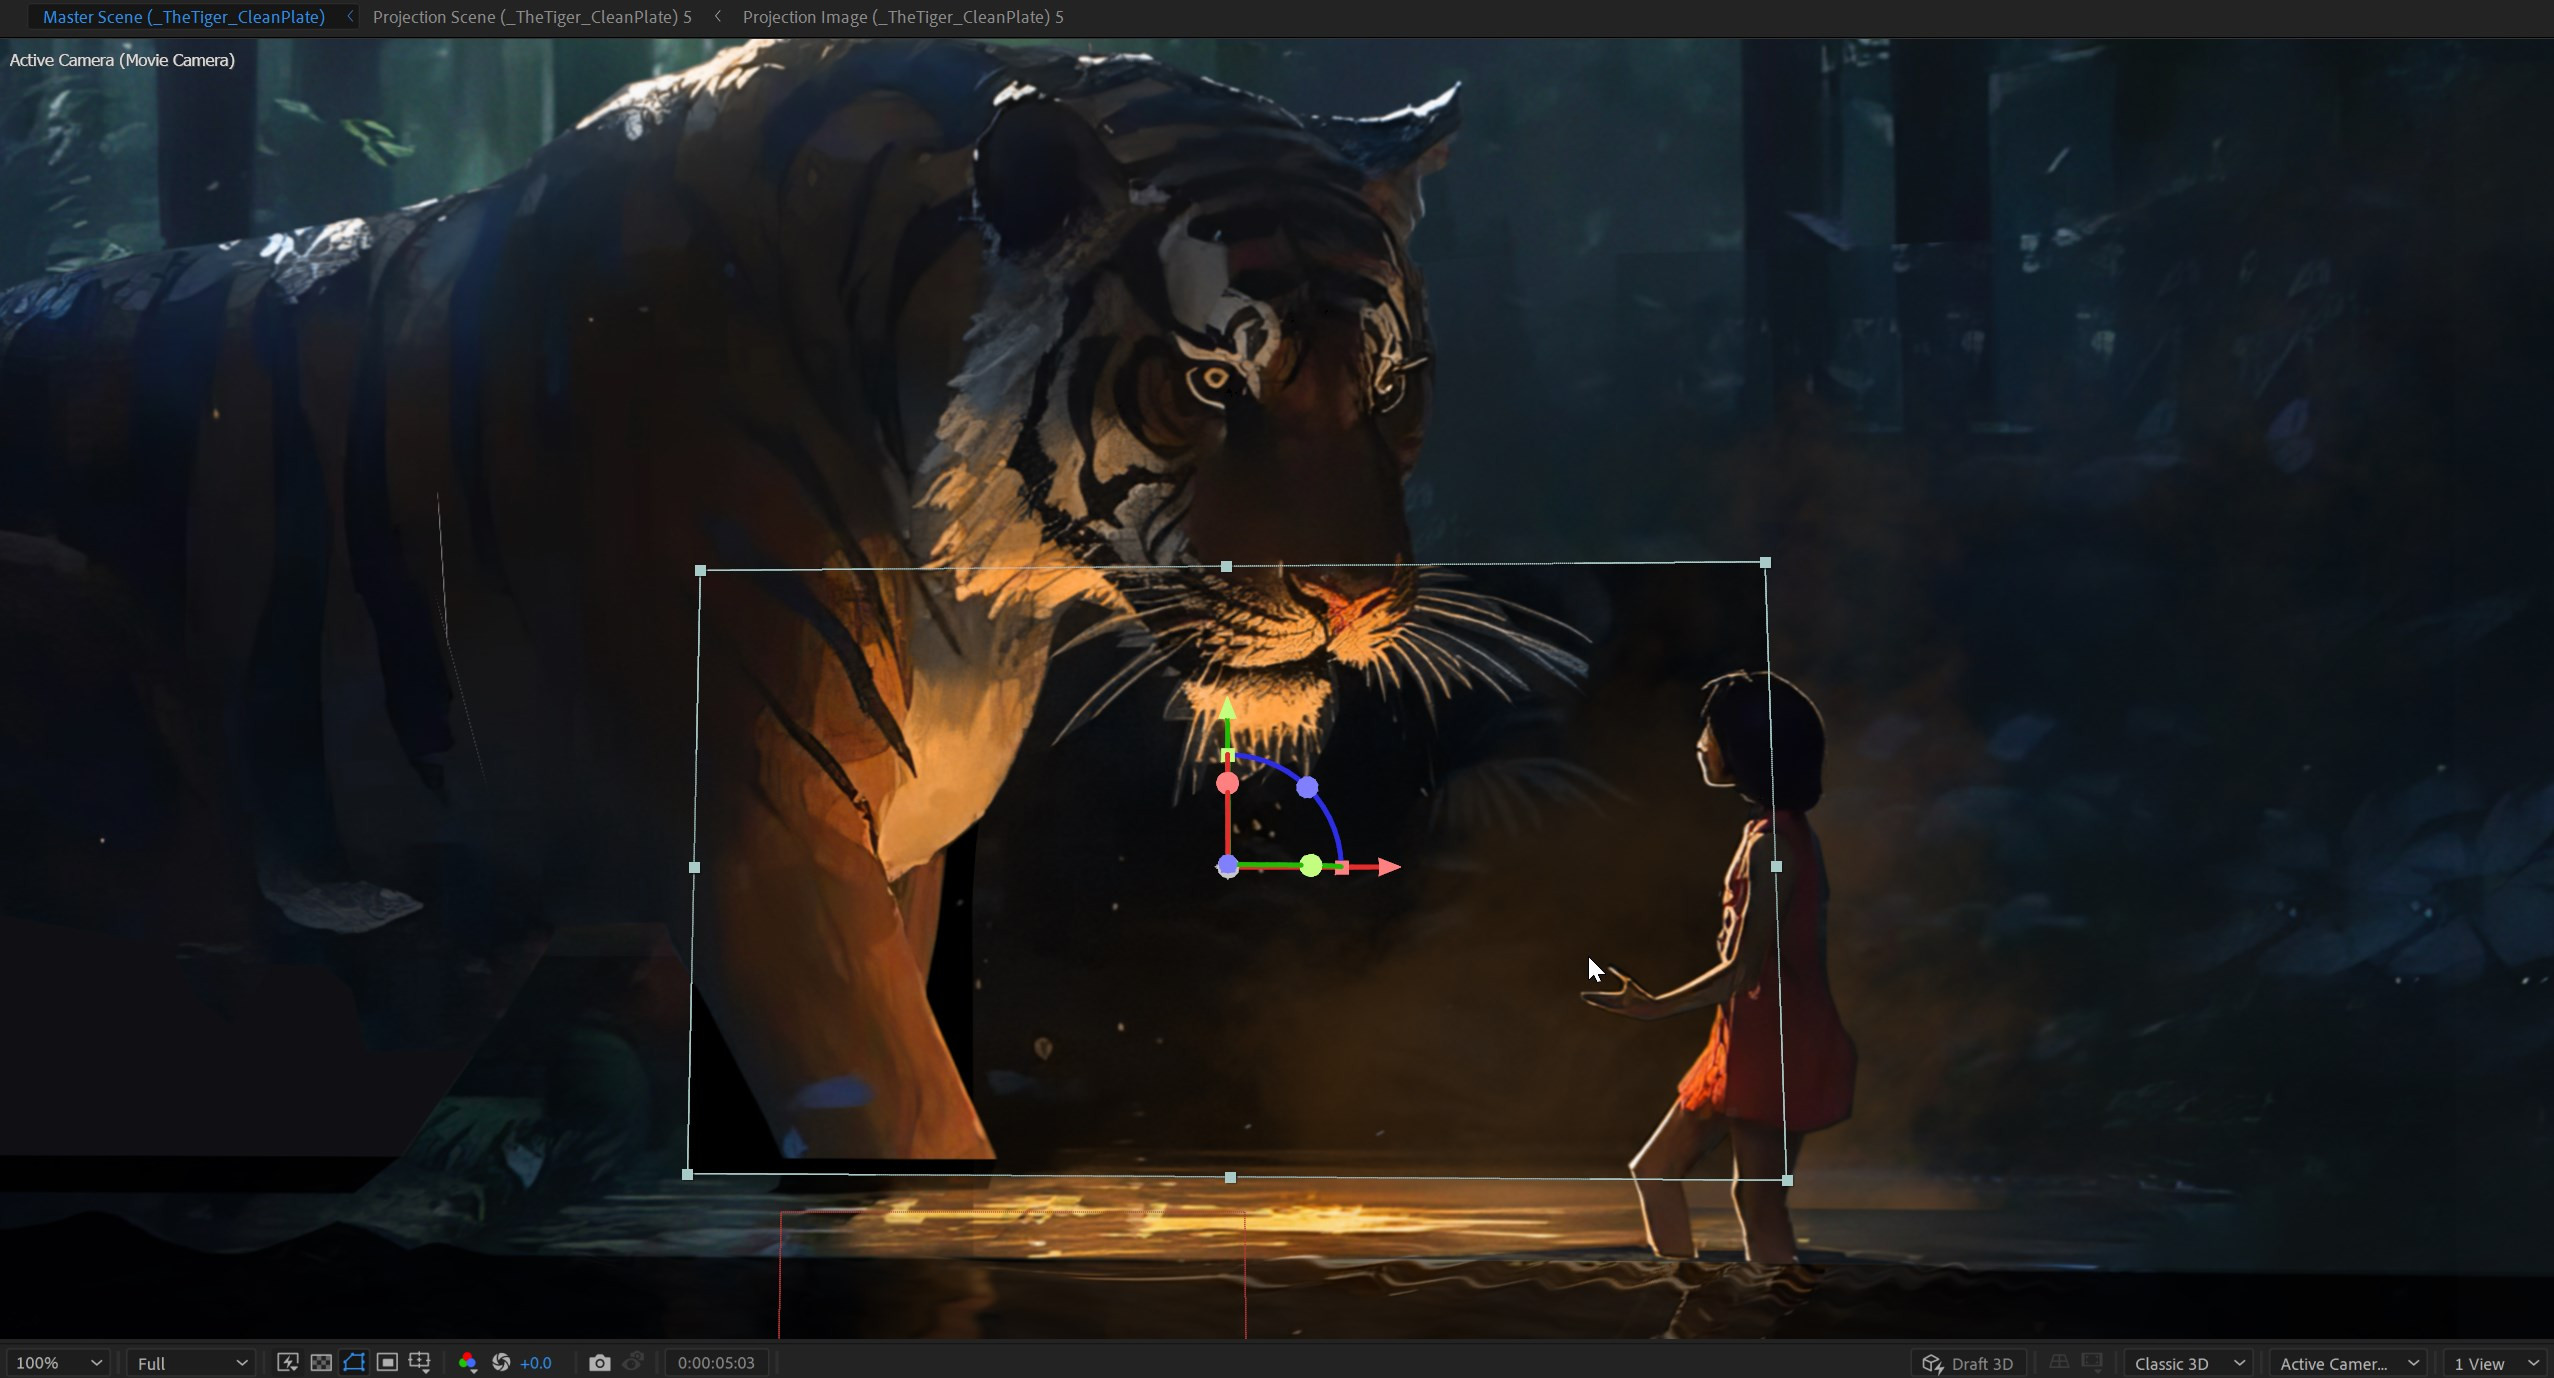 The boy stood next to the big cat, nervous and unsure of what to do. He was lost in the jungle, and the tiger could have easily kill him.